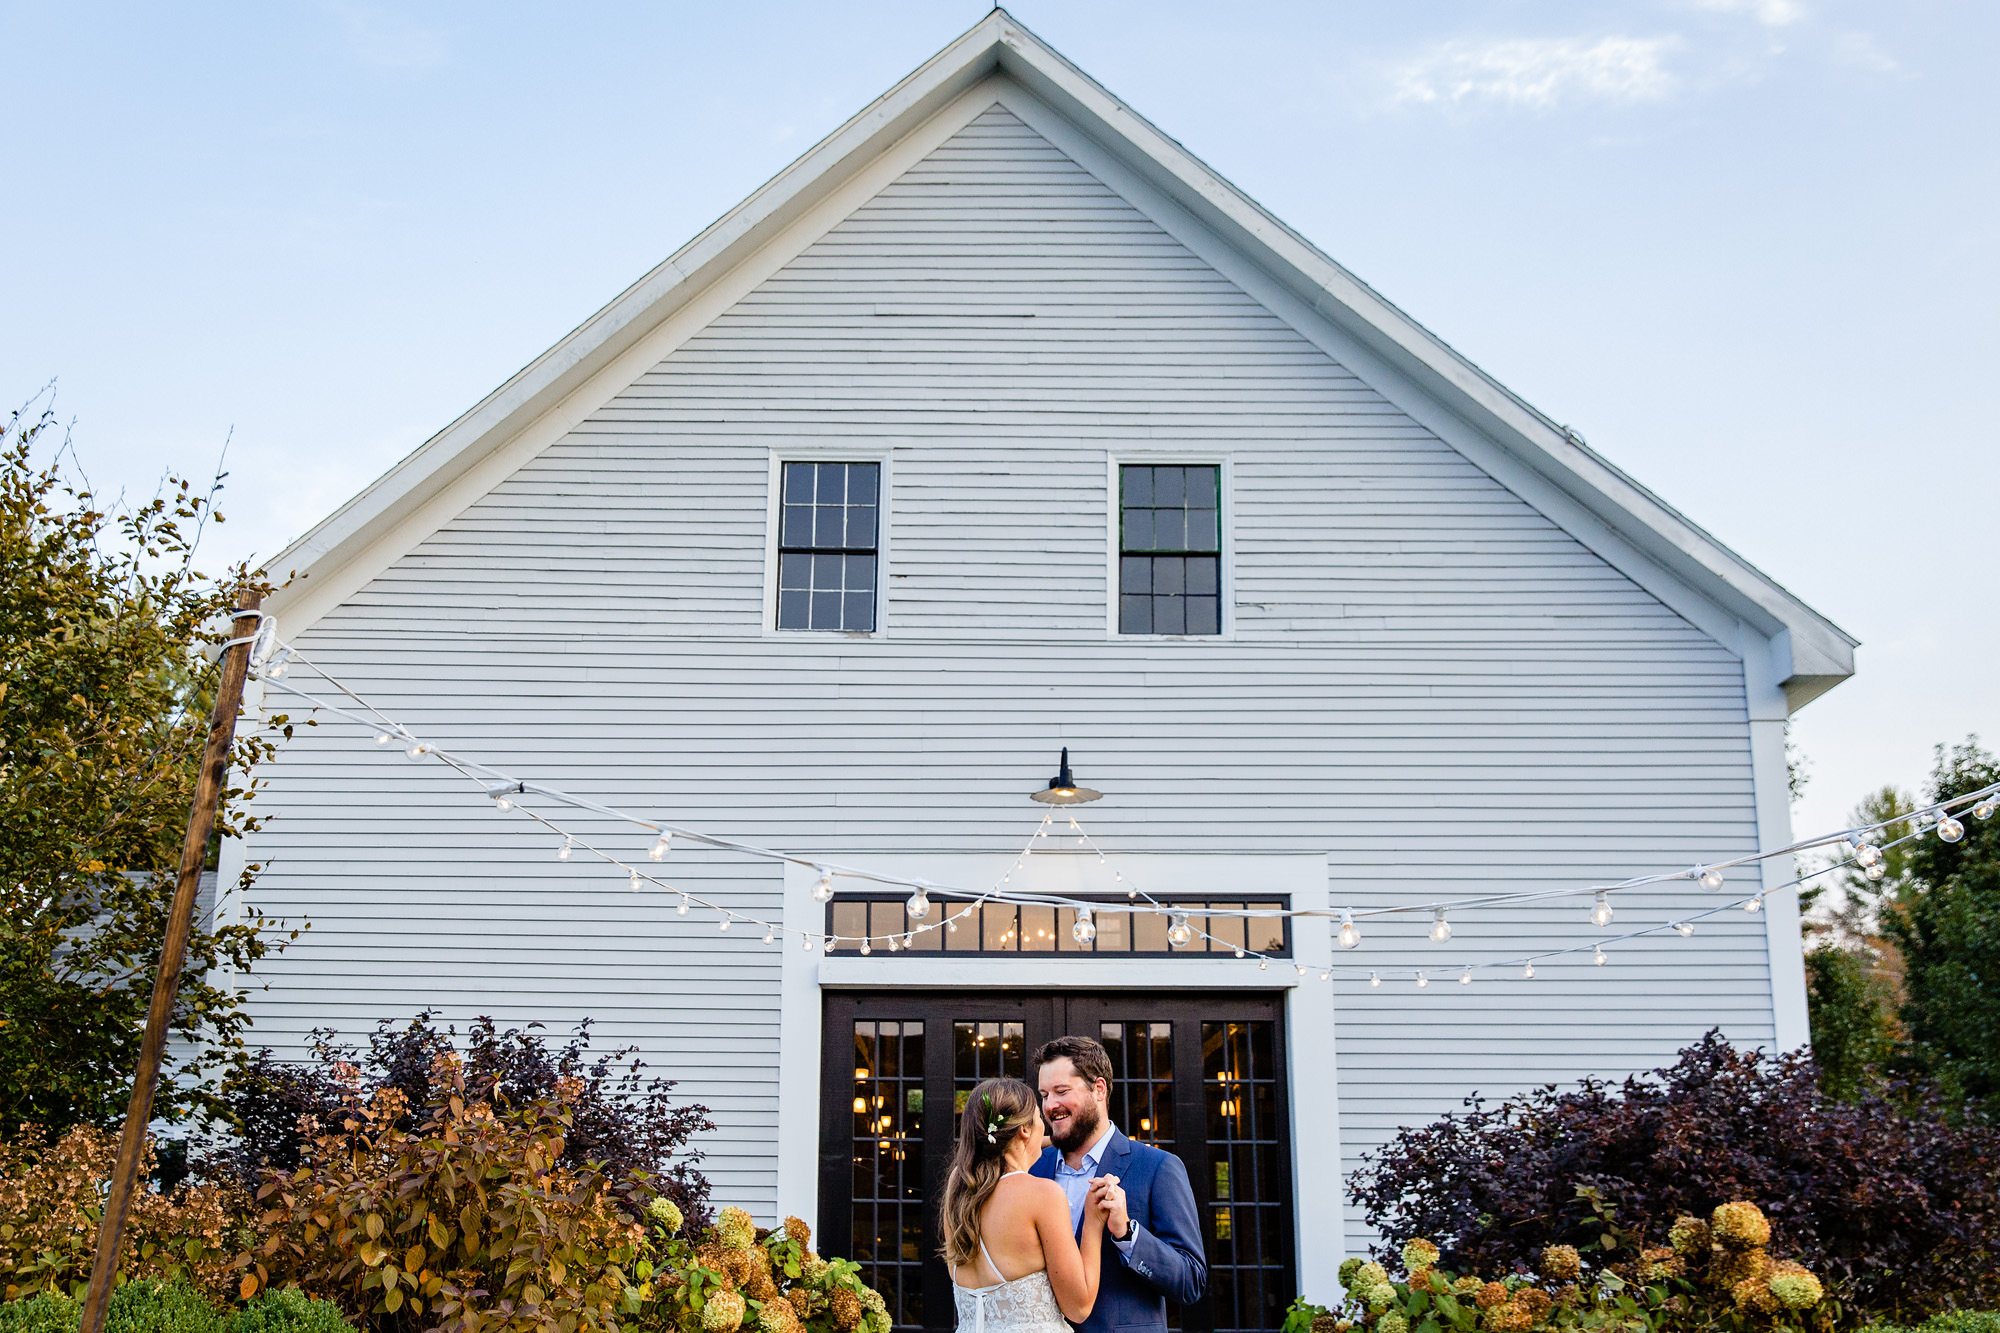 The bride and groom dance in front of The Barn at Flanagan Farm in Maine